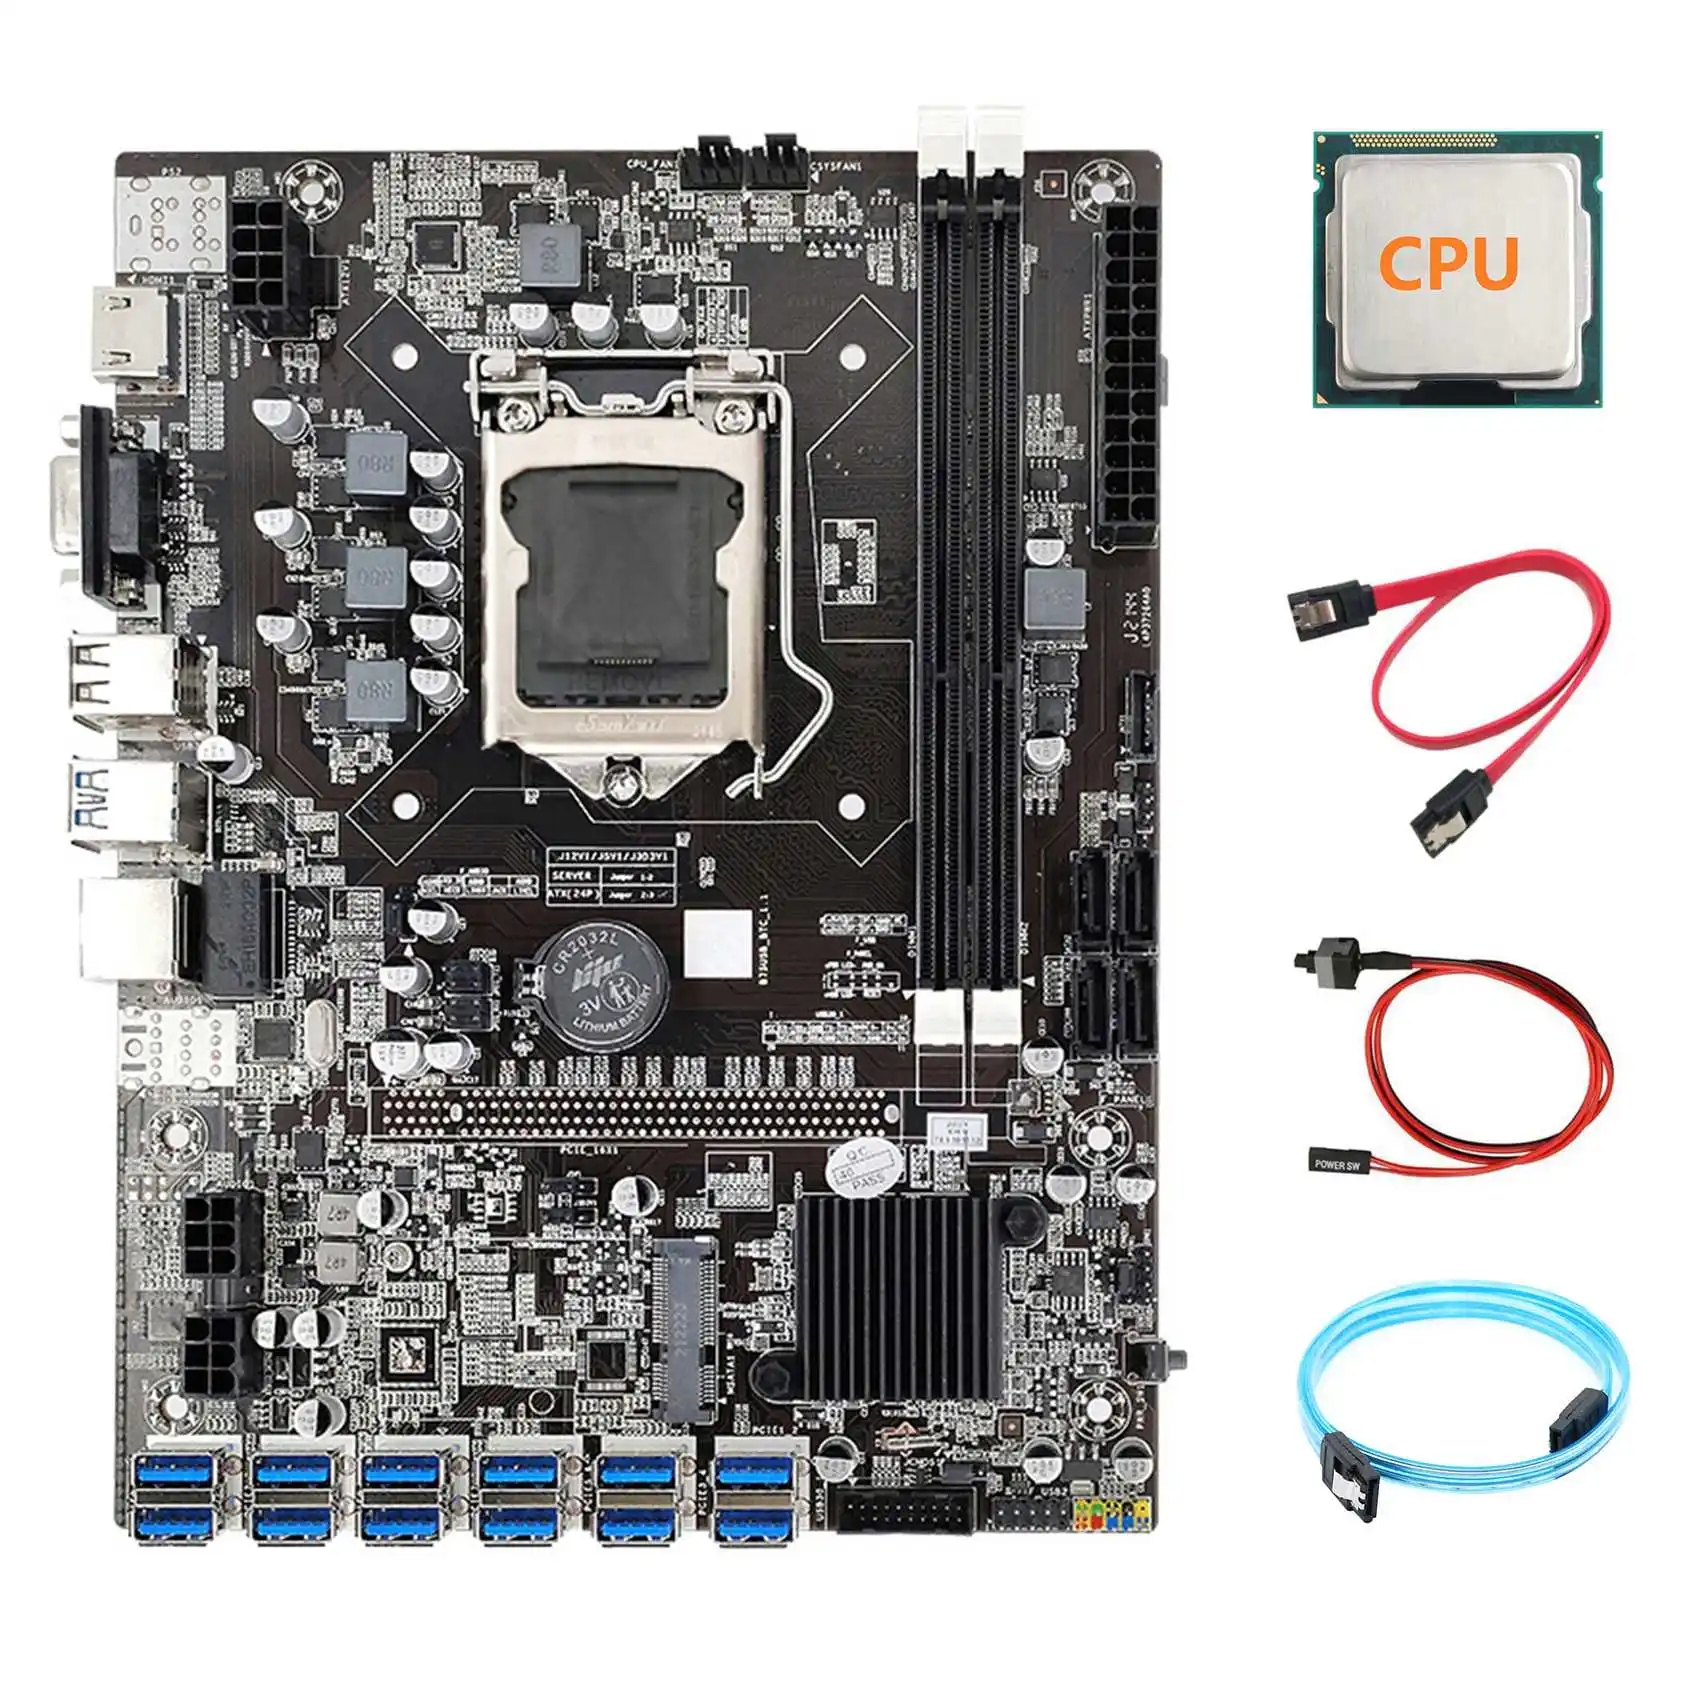 B75 ETH Miner Motherboard 12 PCIE to USB+Random CPU+SATA3.0 Serial Port Cable+SATA Cable+Switch Cable LGA1155 Board